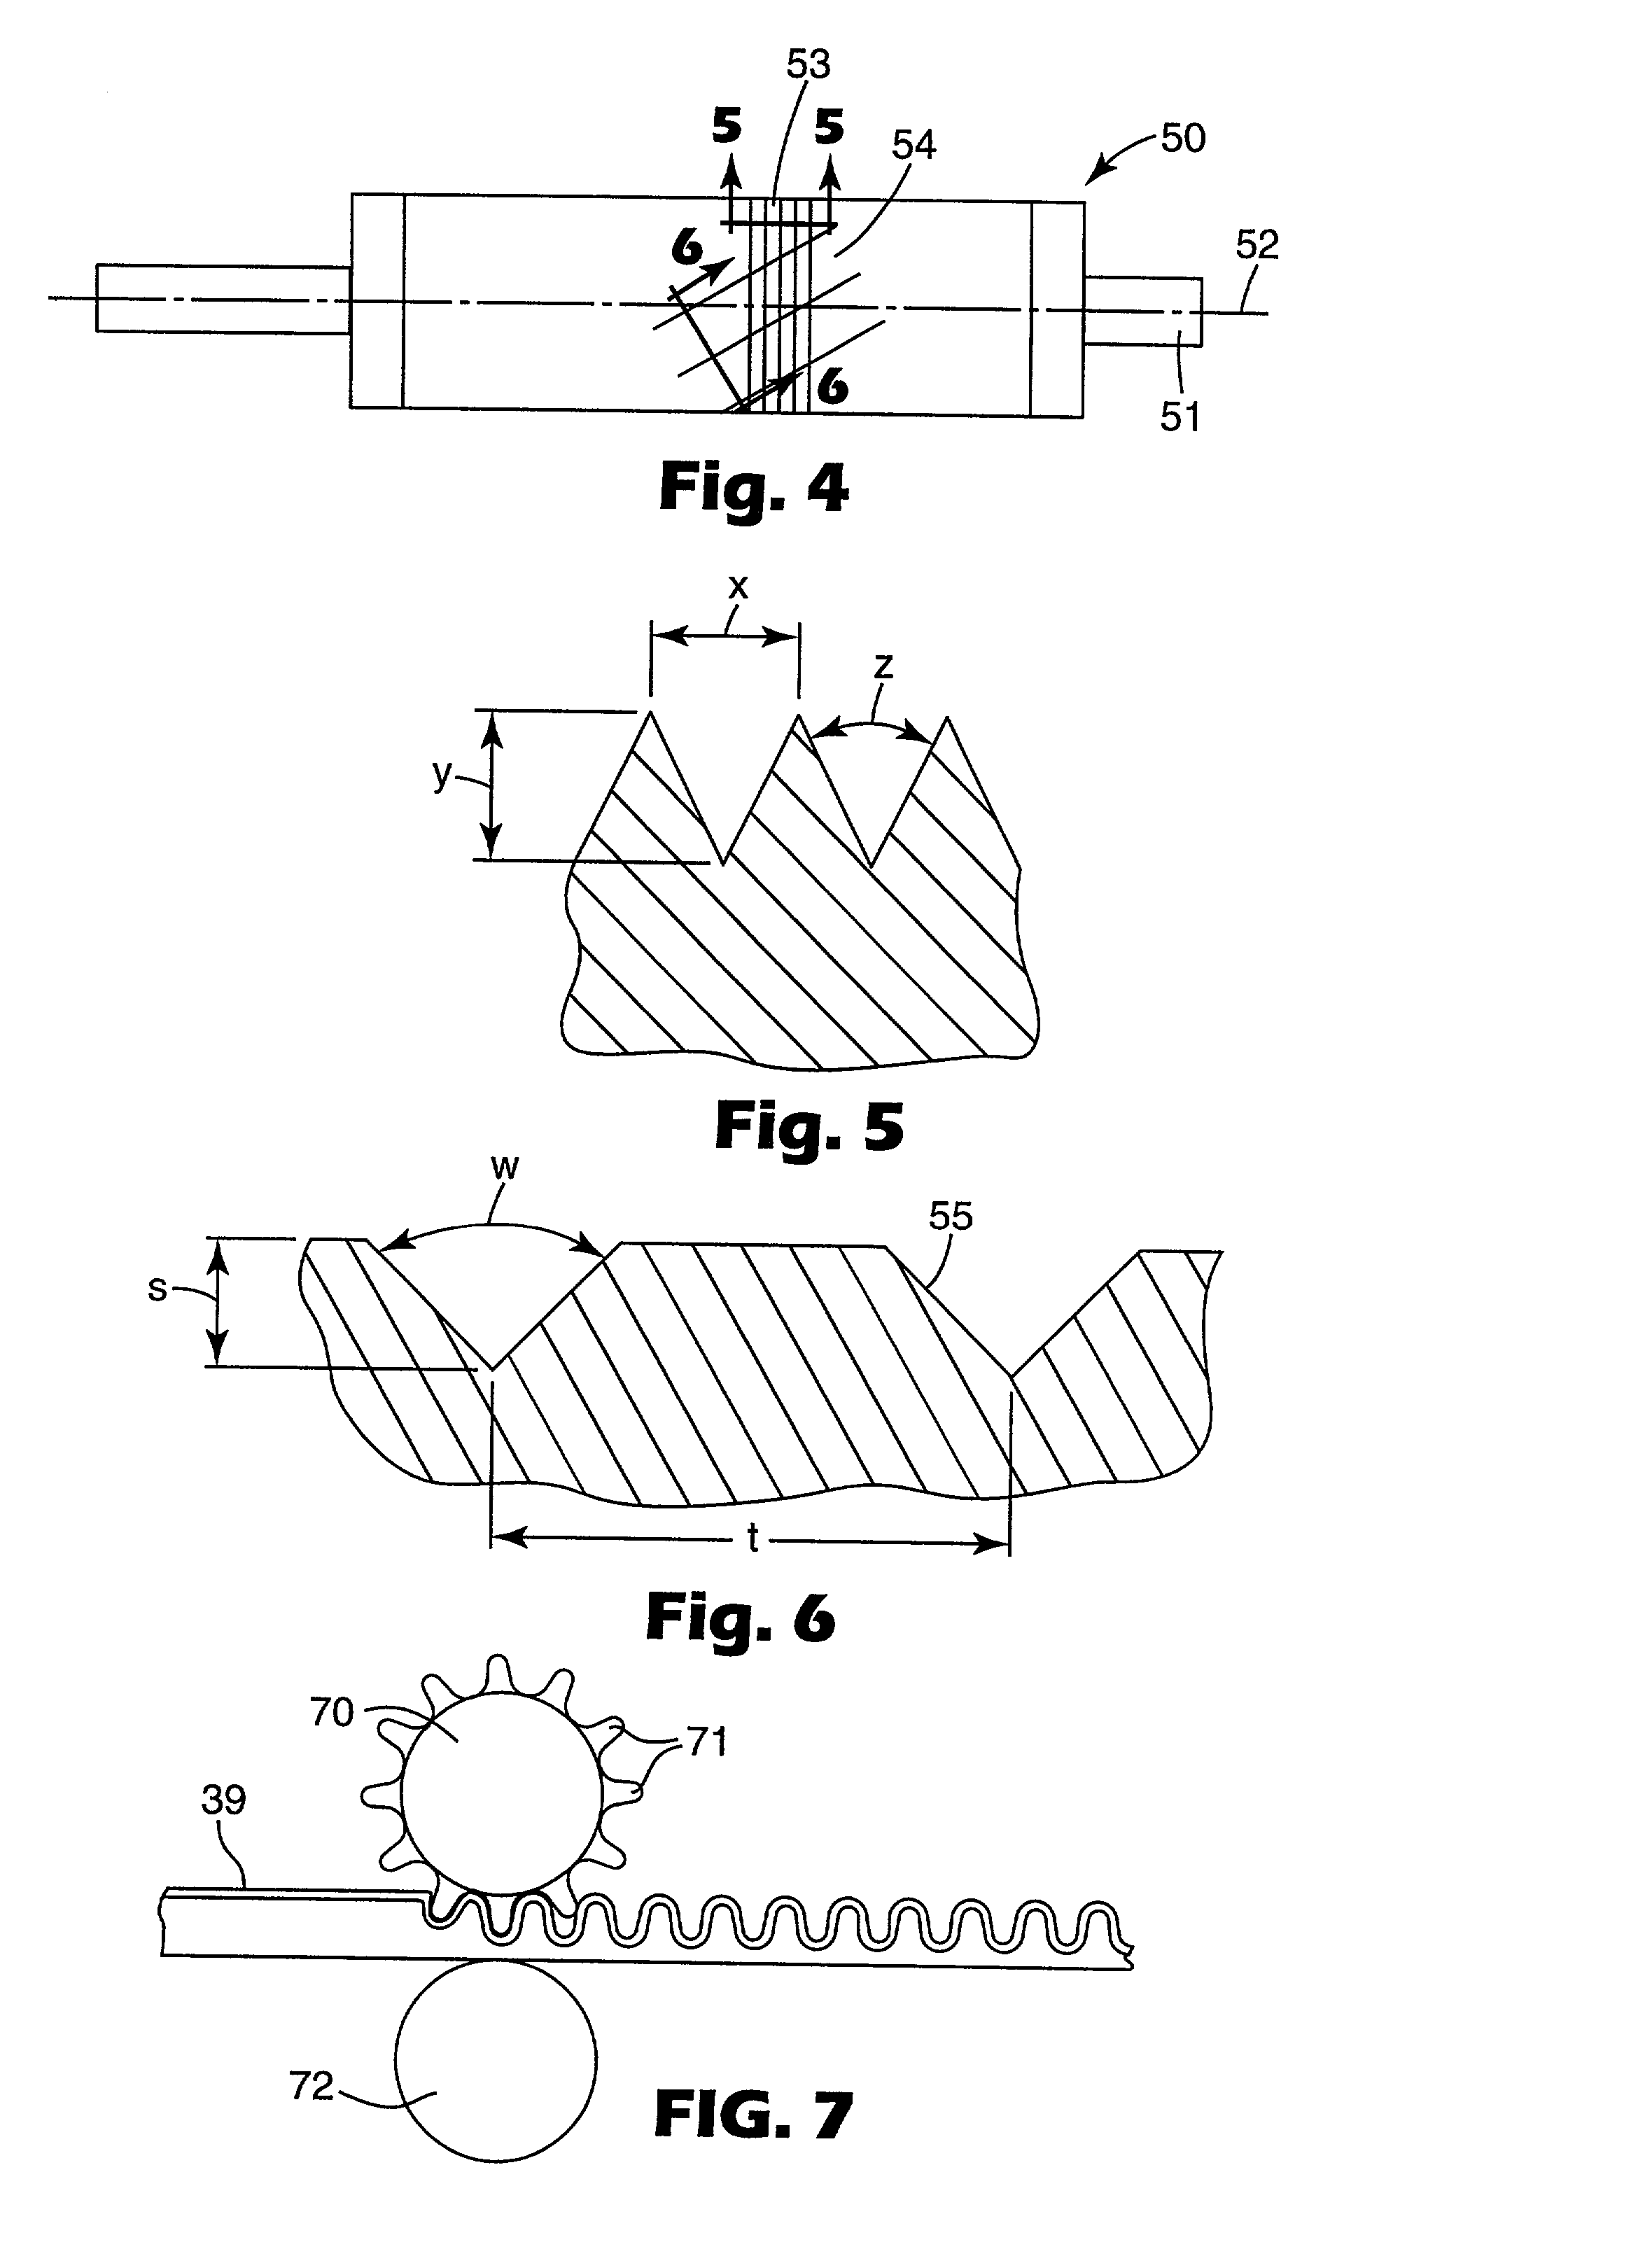 Method of making an abrasive product